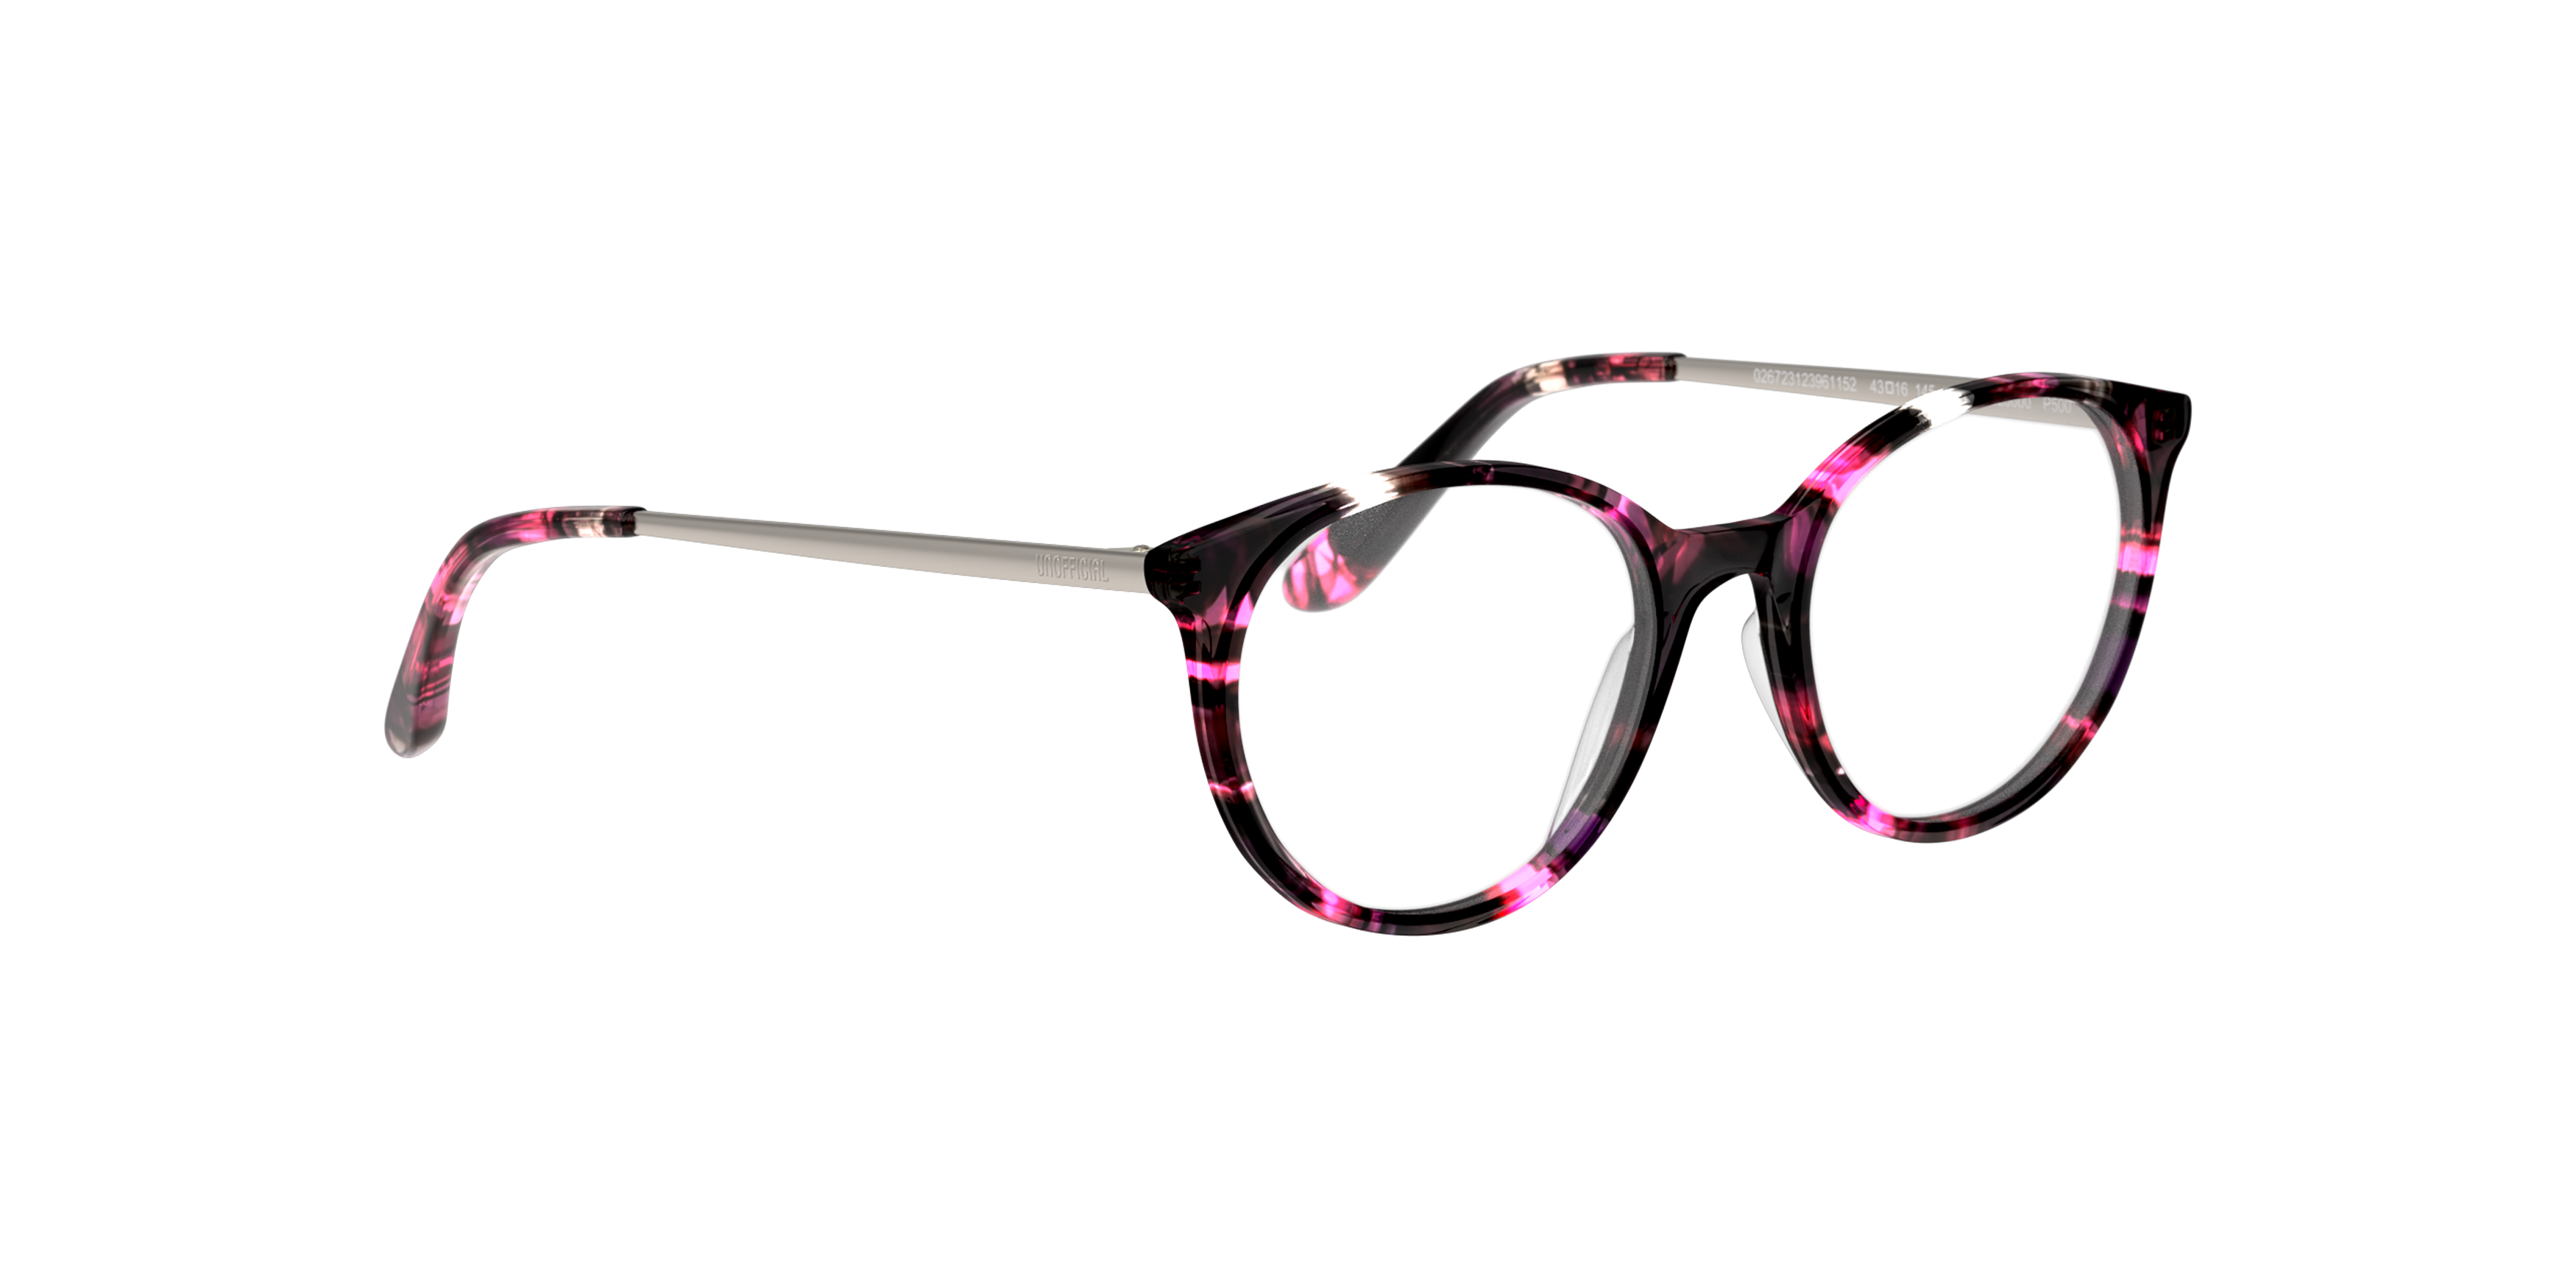 Angle_Right01 Unofficial UNOF0030 (PS00) Glasses Transparent / Pink